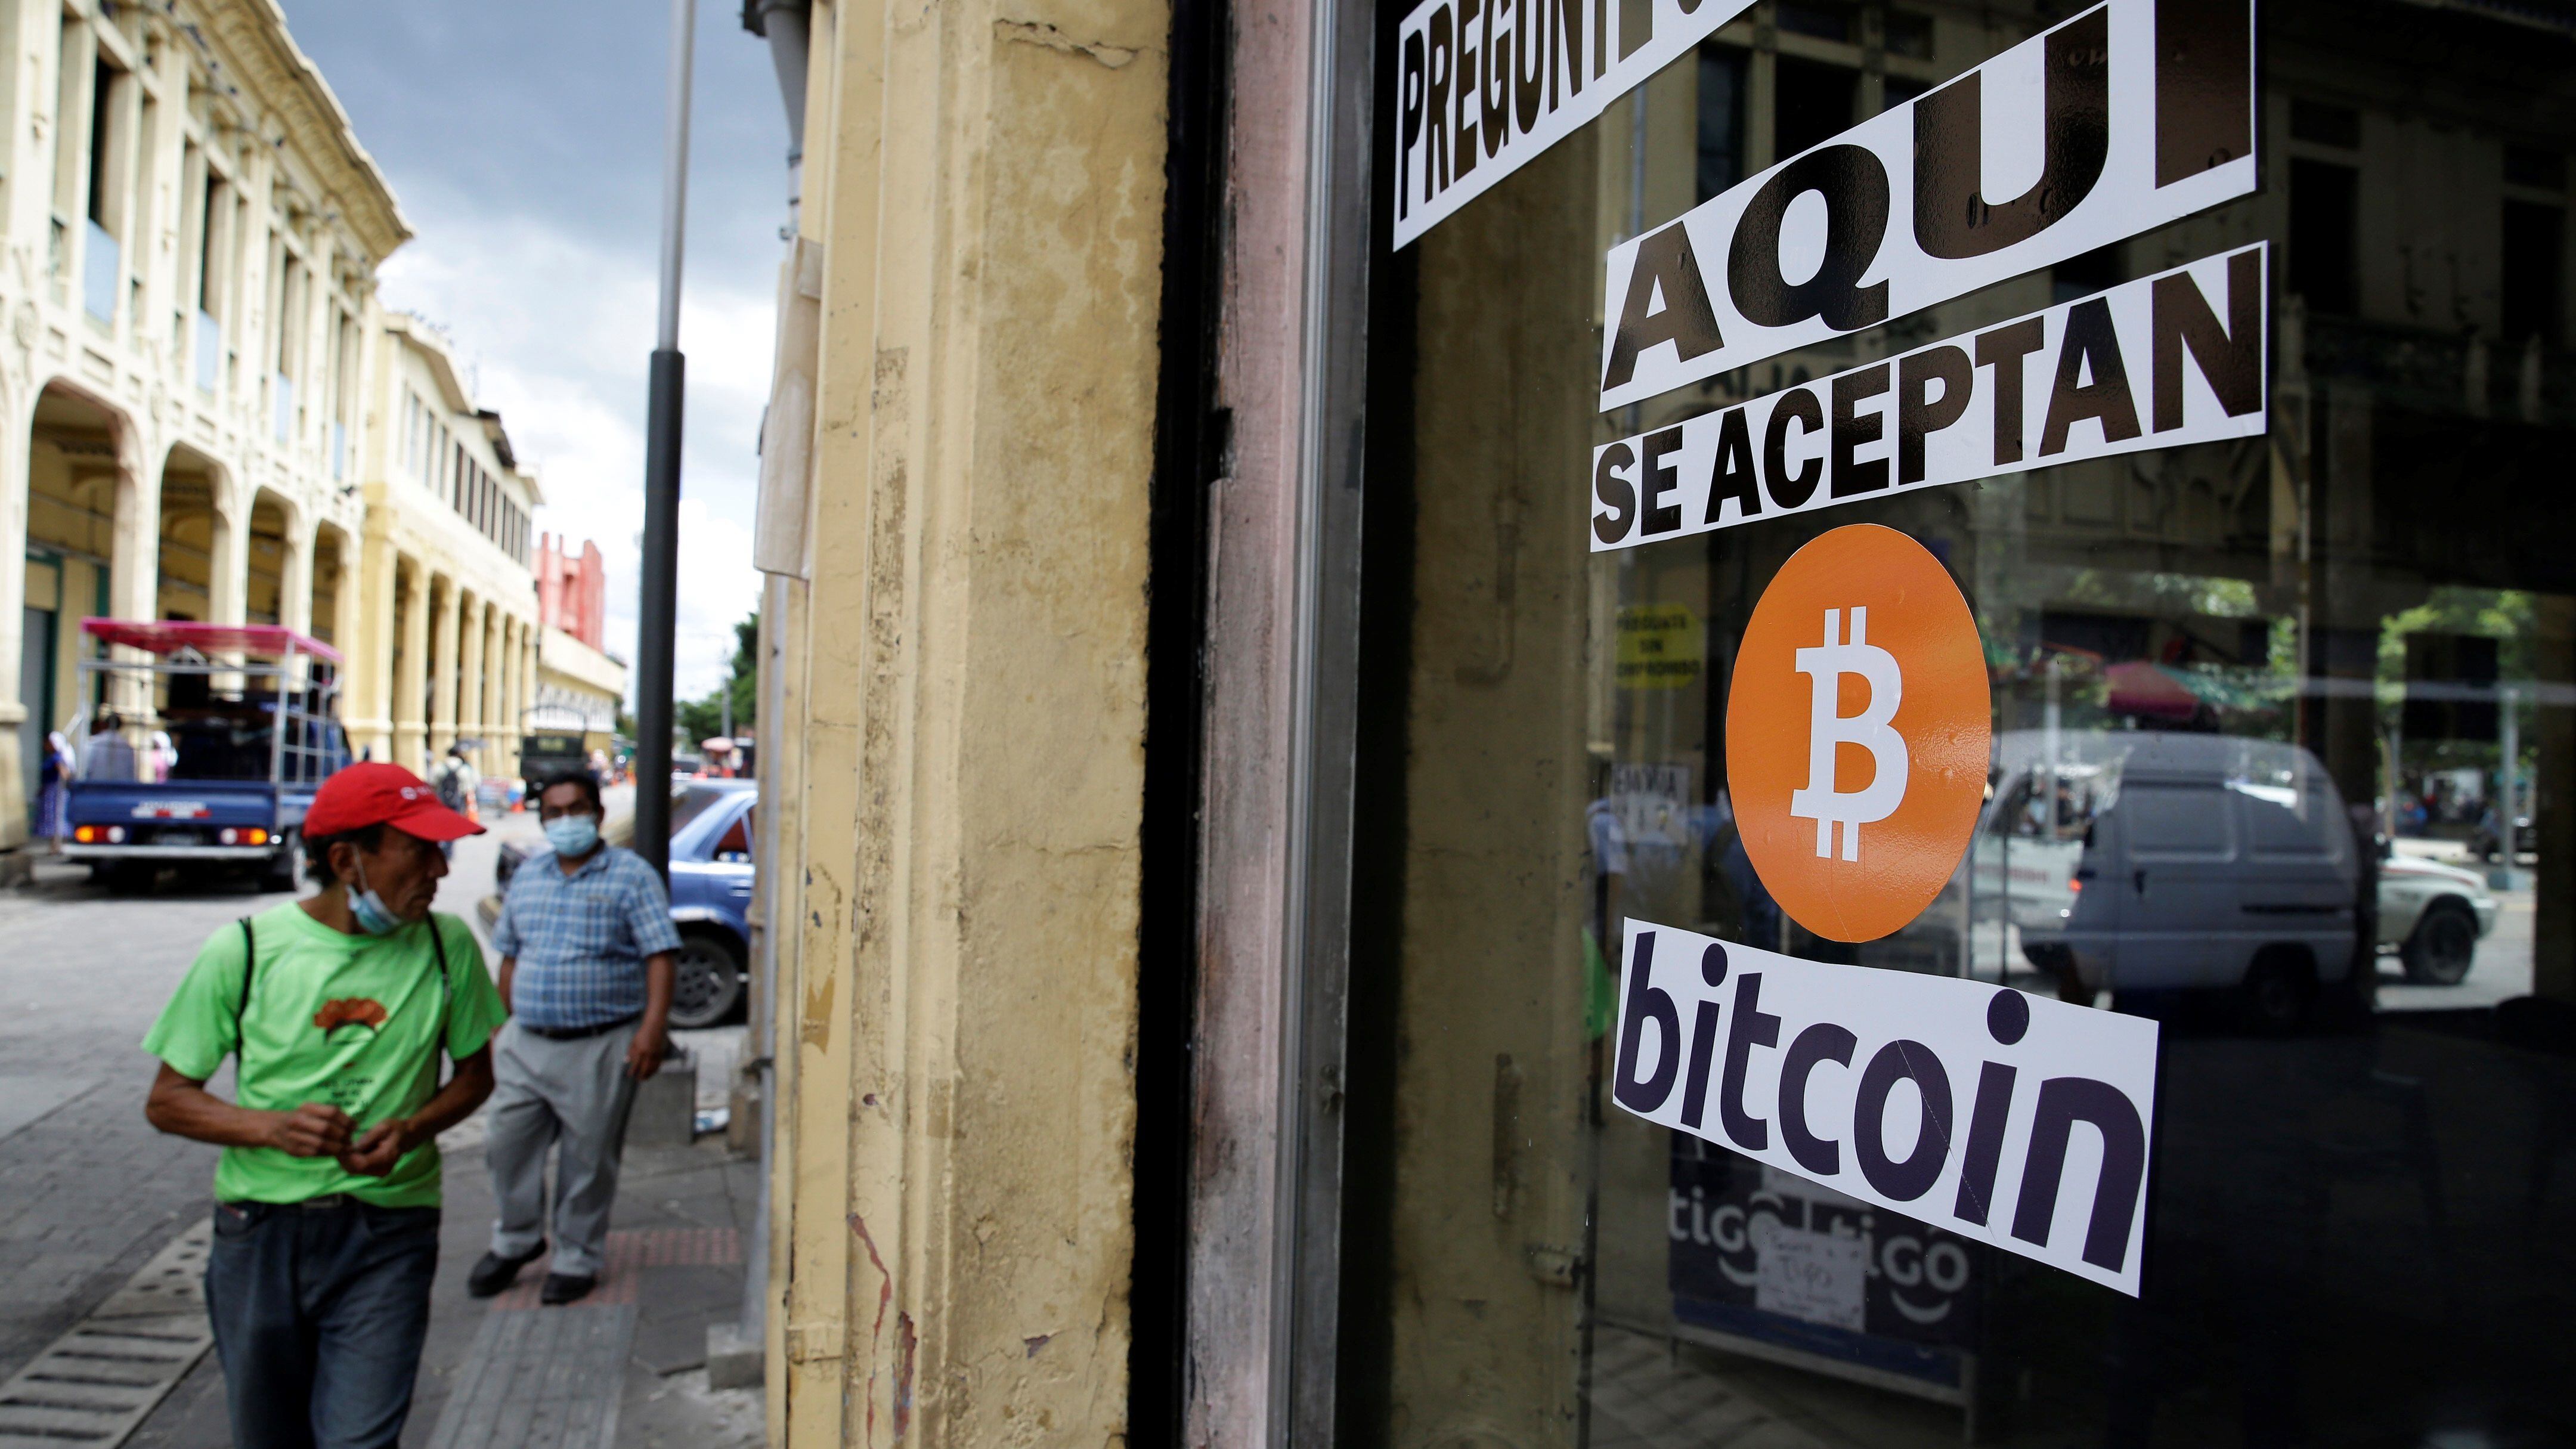 The Salvadoran authorities approved a law on bitcoin, which made it the first country in the world to accept that cryptocurrency as legal tender (Photo: EFE / Rodrigo Sura)
